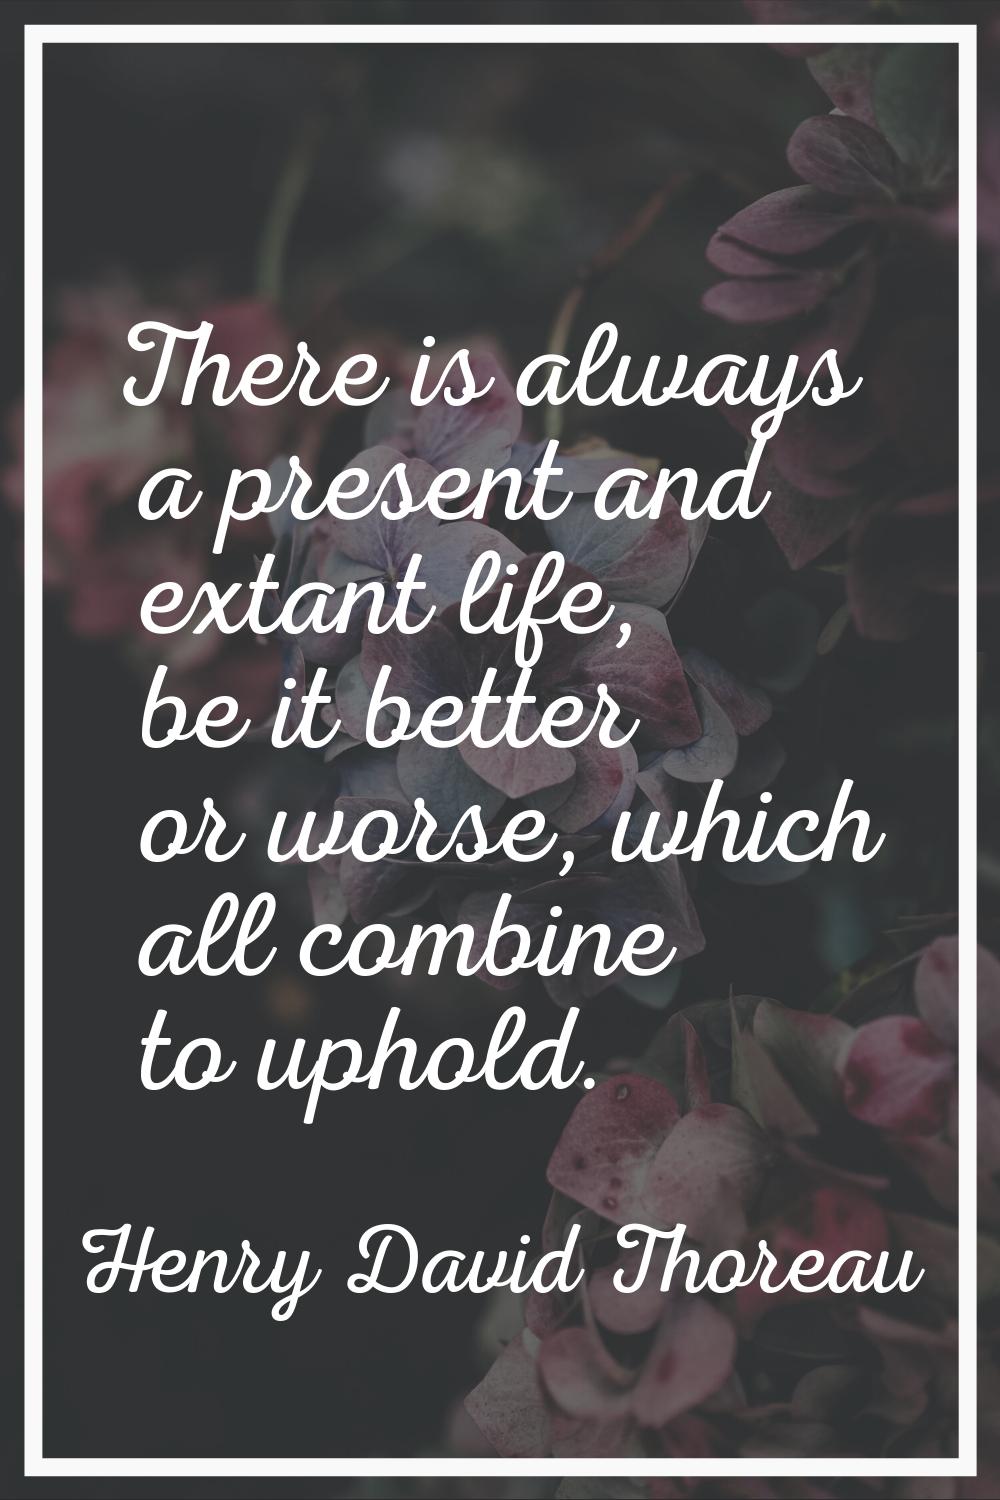 There is always a present and extant life, be it better or worse, which all combine to uphold.